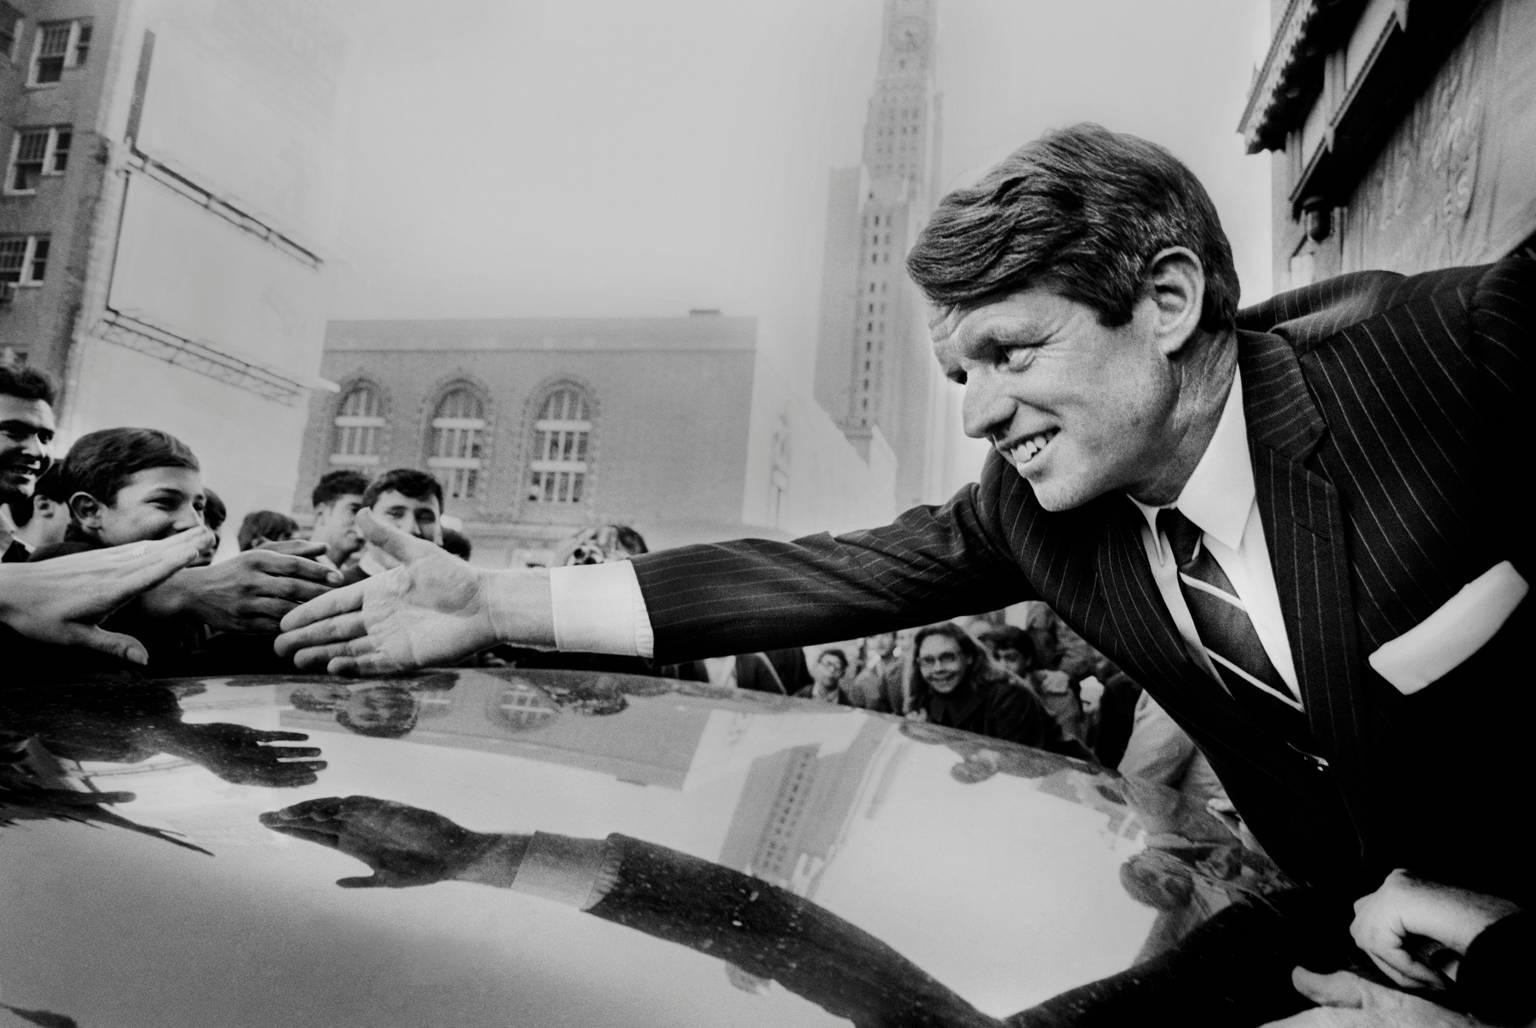 Jean-Pierre Laffont Black and White Photograph - Bob Kennedy reaching hand over car, Brooklyn, New York 